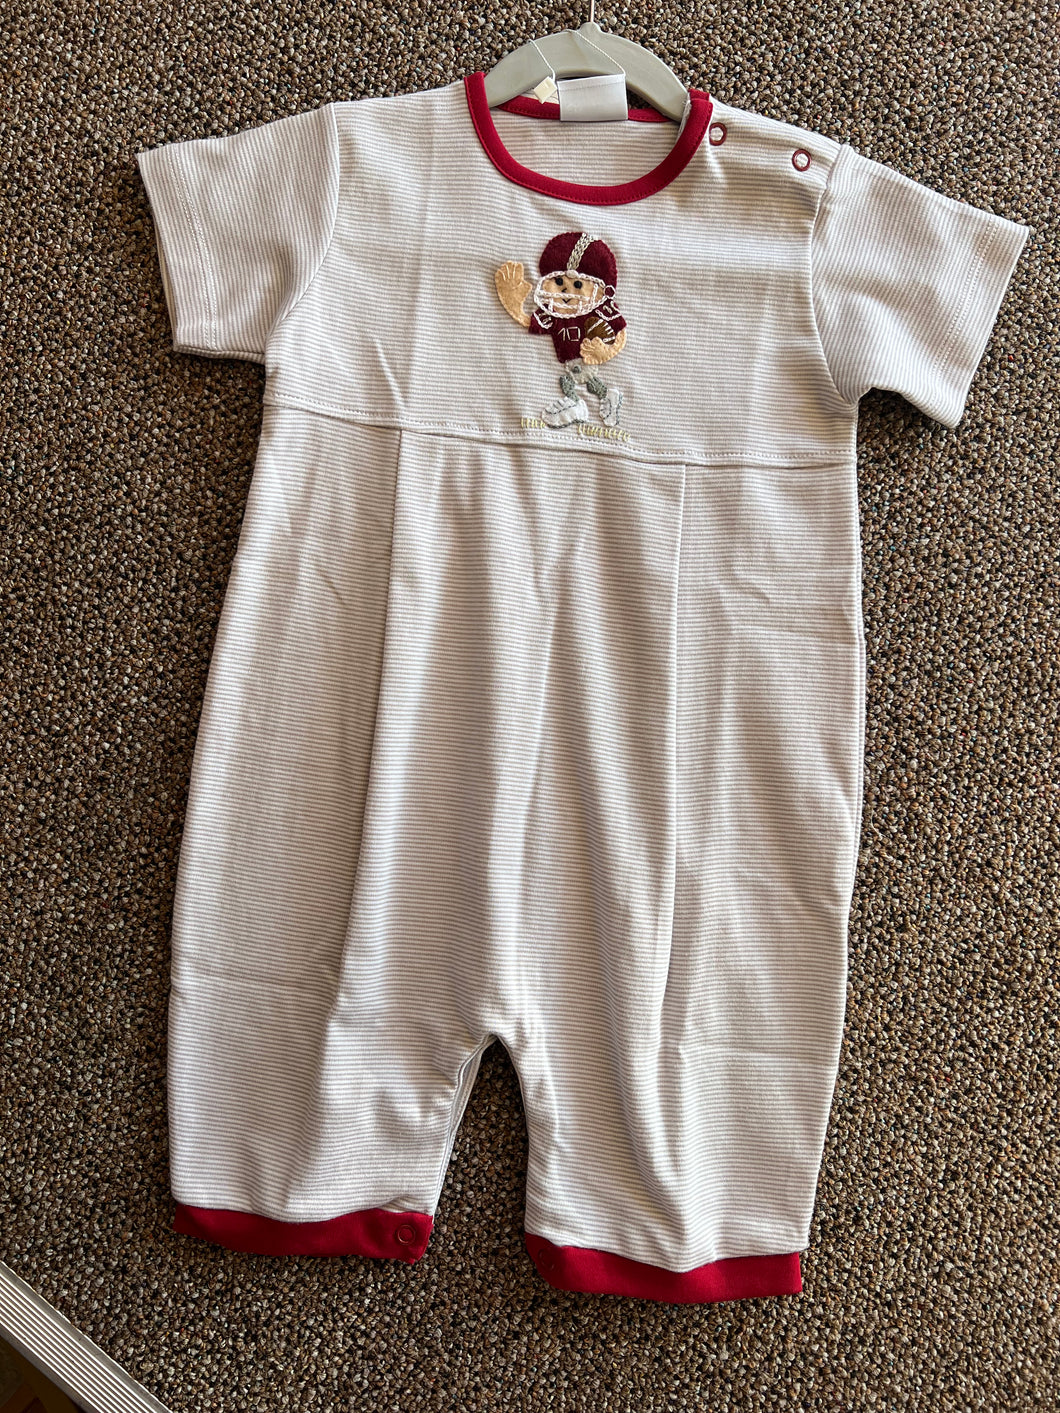 Gray & Maroon Running Back Romper by Squiggles